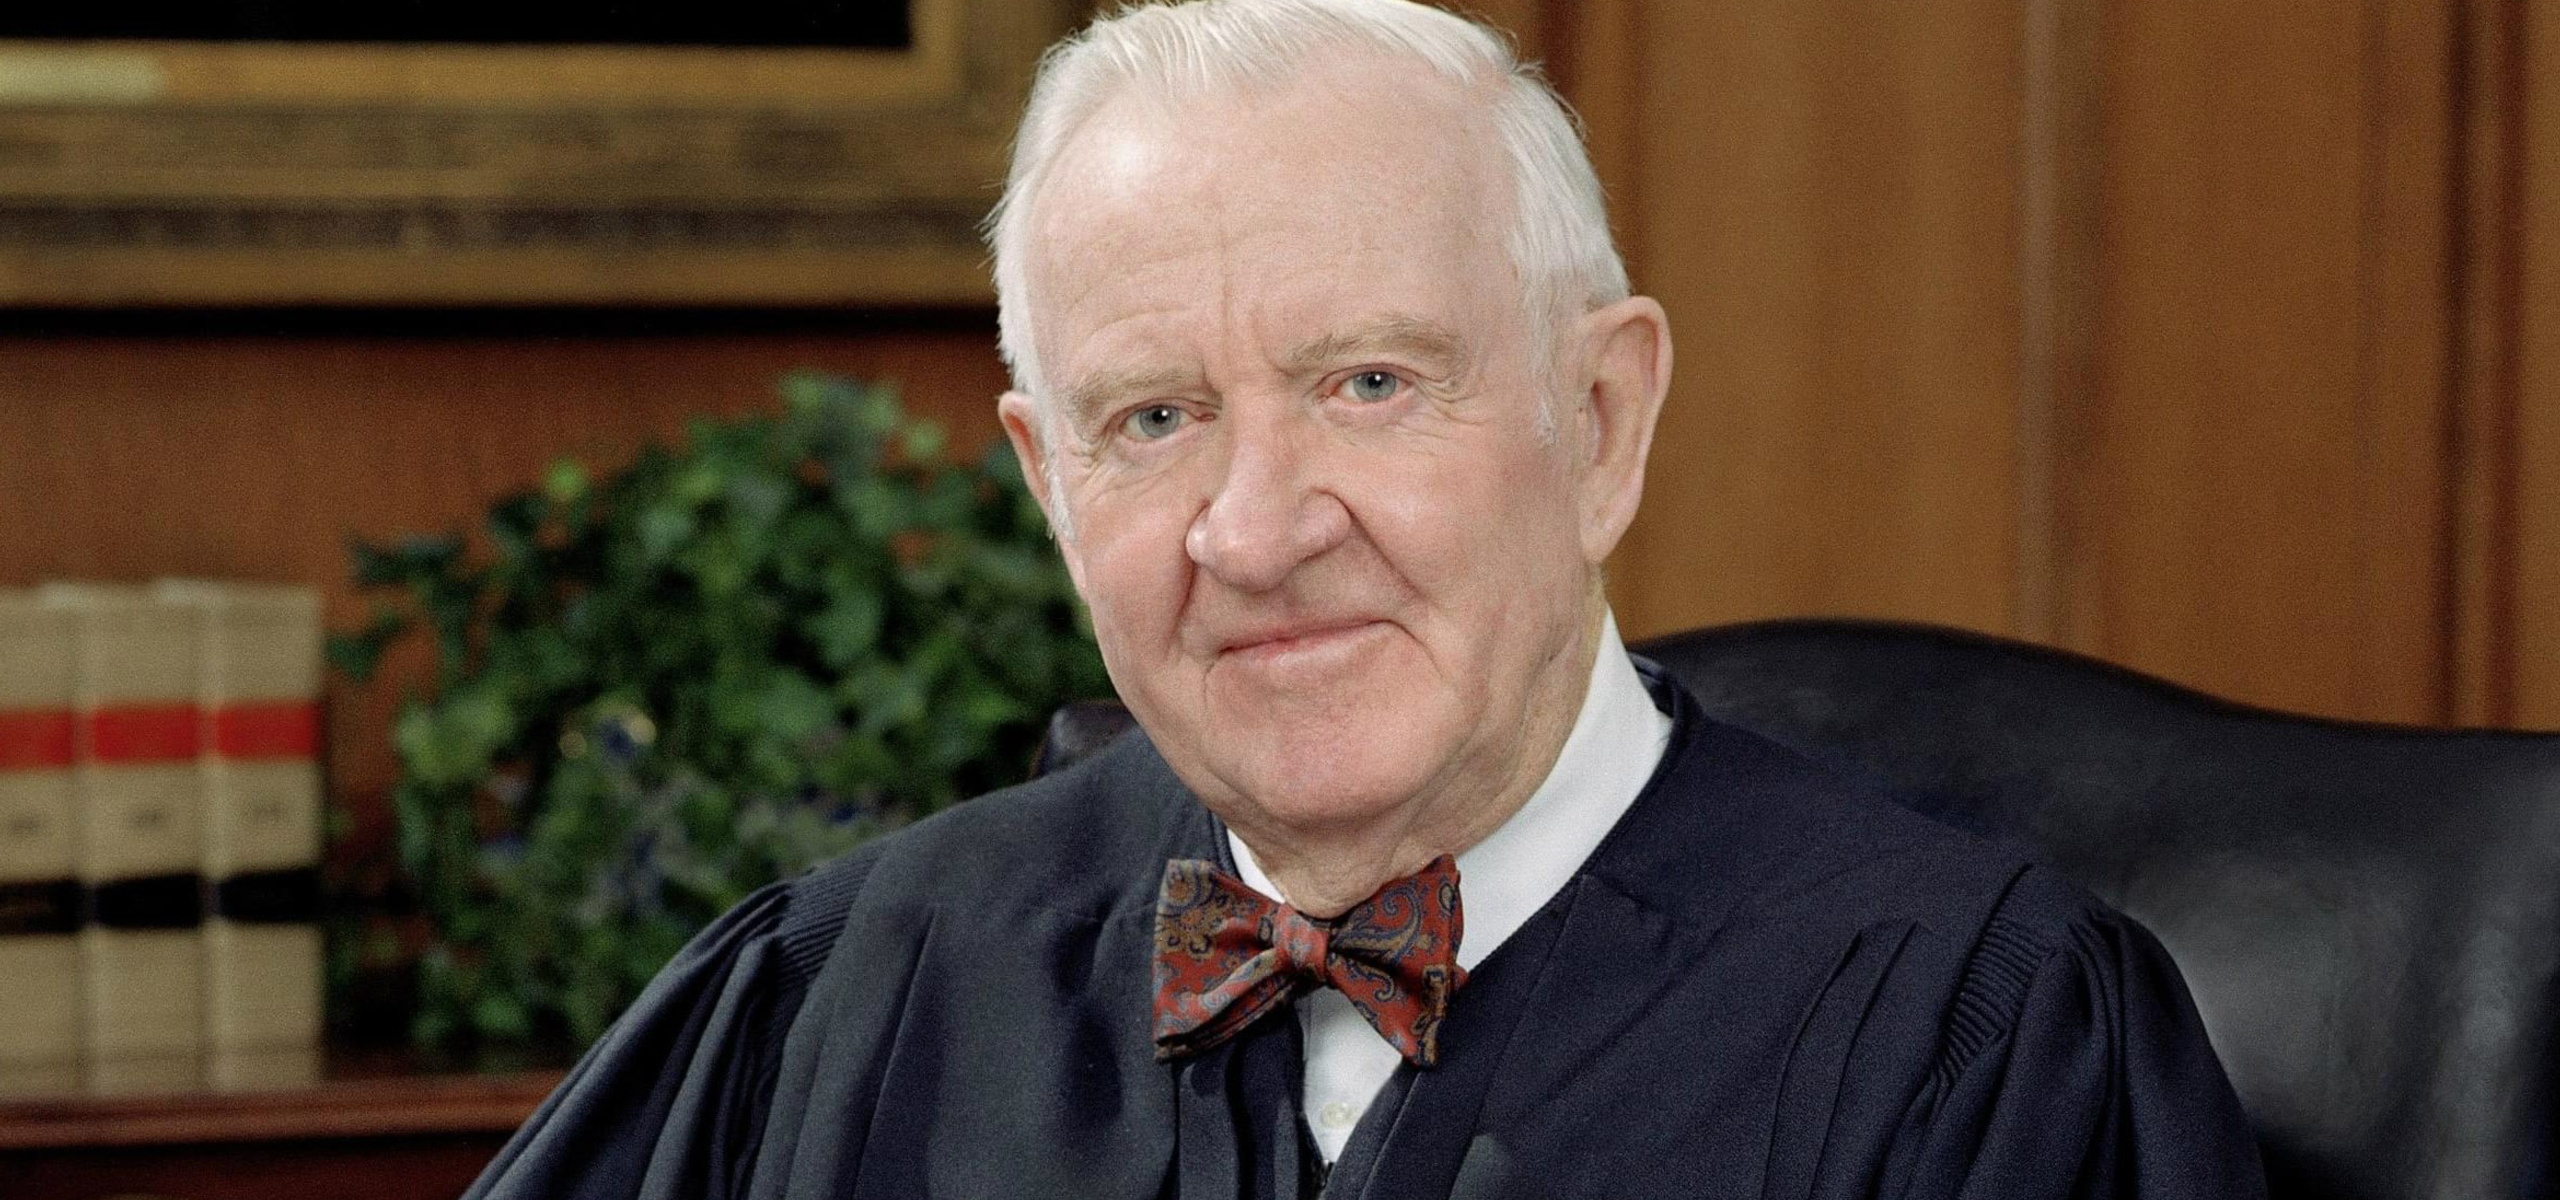 Justice John Paul Stevens and the Slow Evolution of the Law